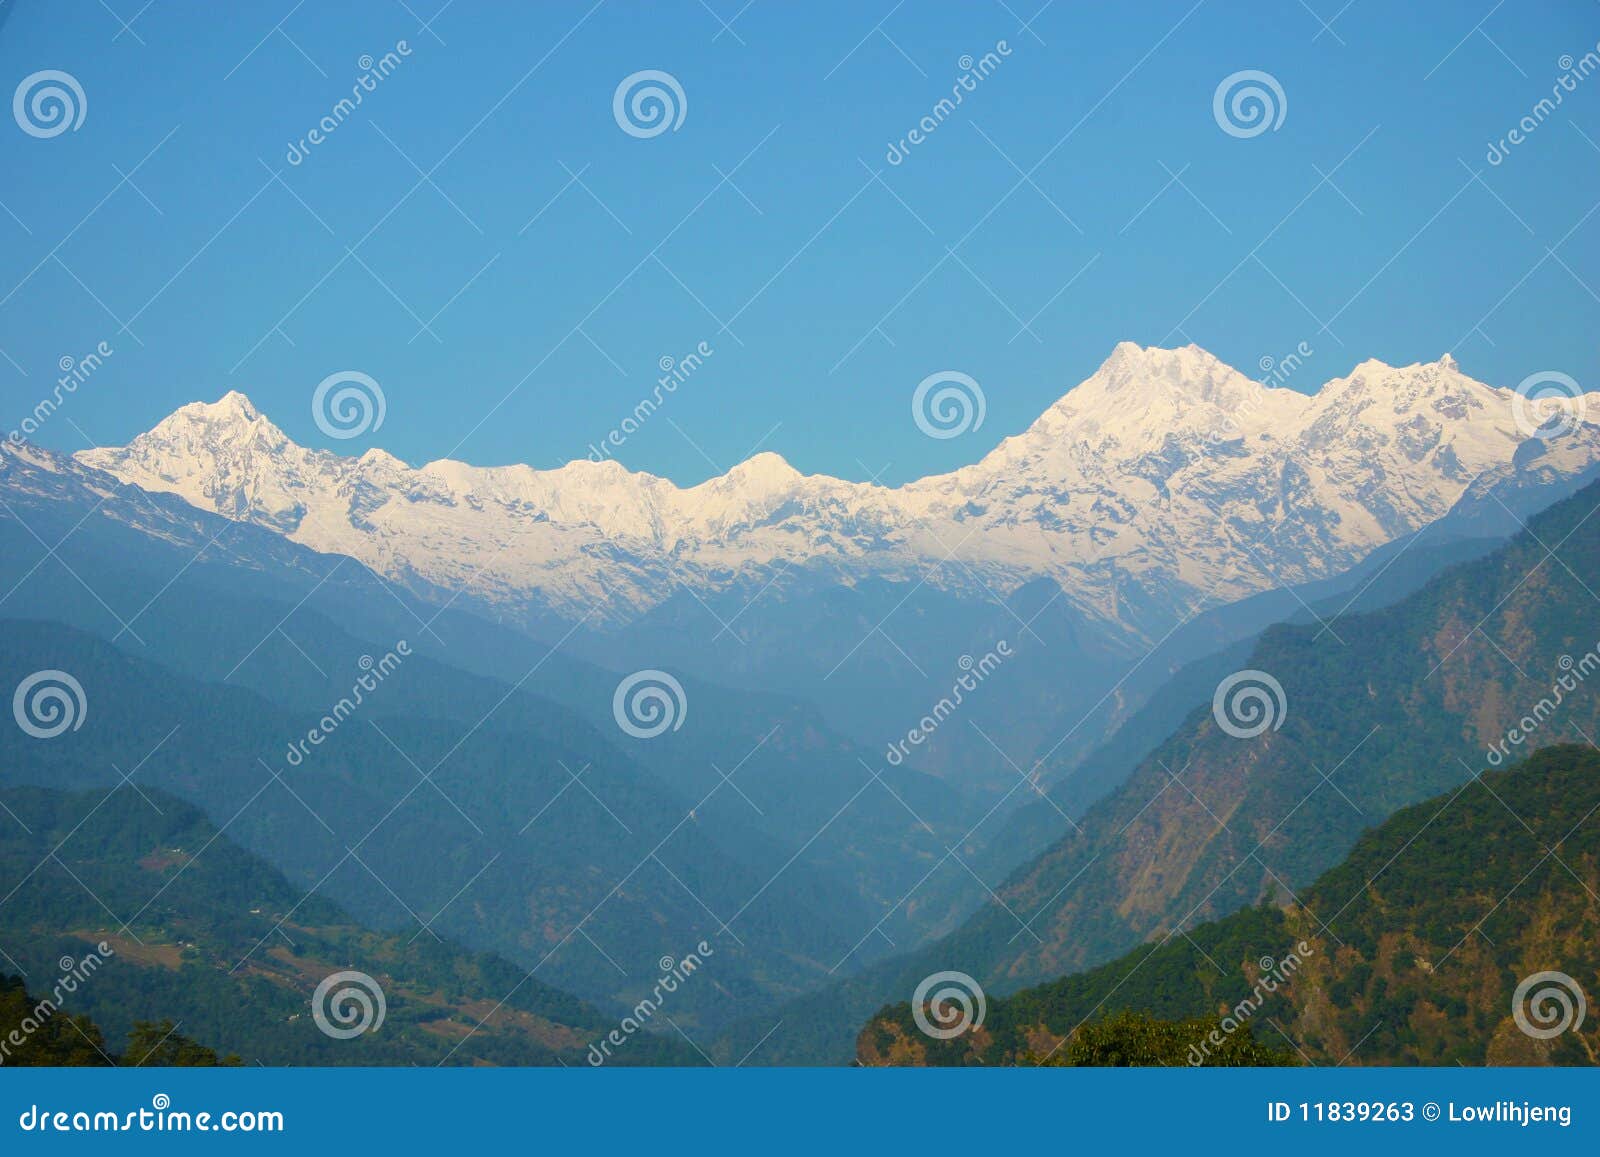 snow covered mountain range, sikkim, himalayans